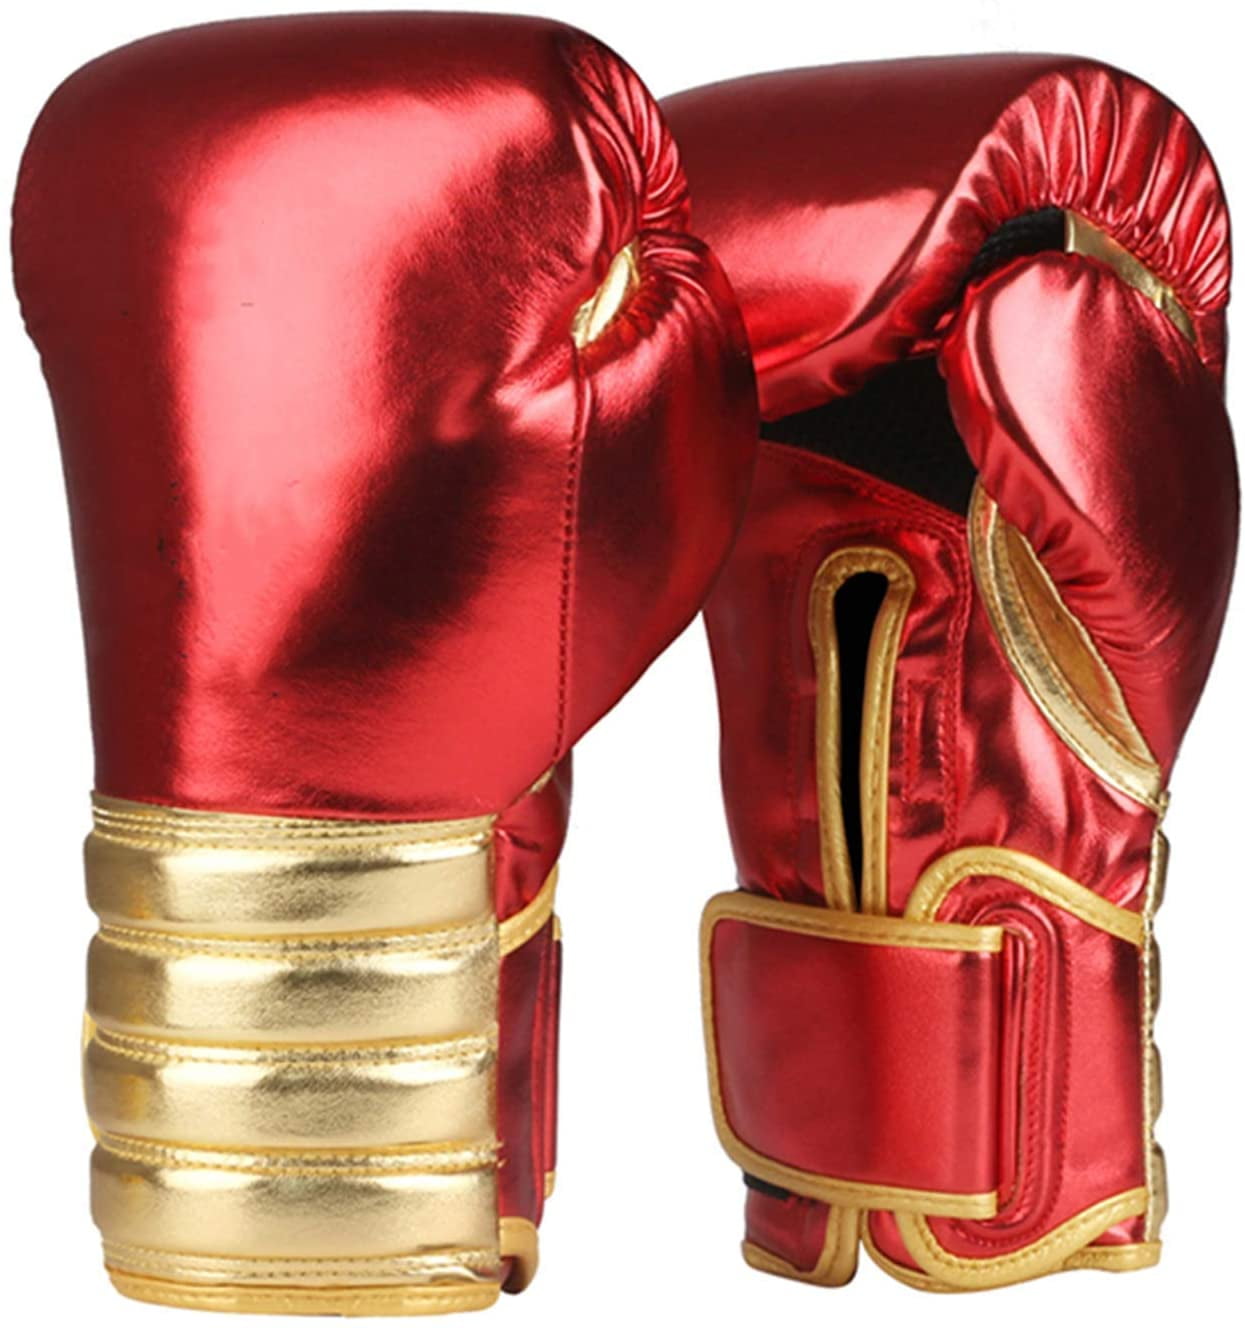 KIDS YOUTH JUNIOR RED BOXING GLOVE WRIST & HAND WRAPS 1.5m 